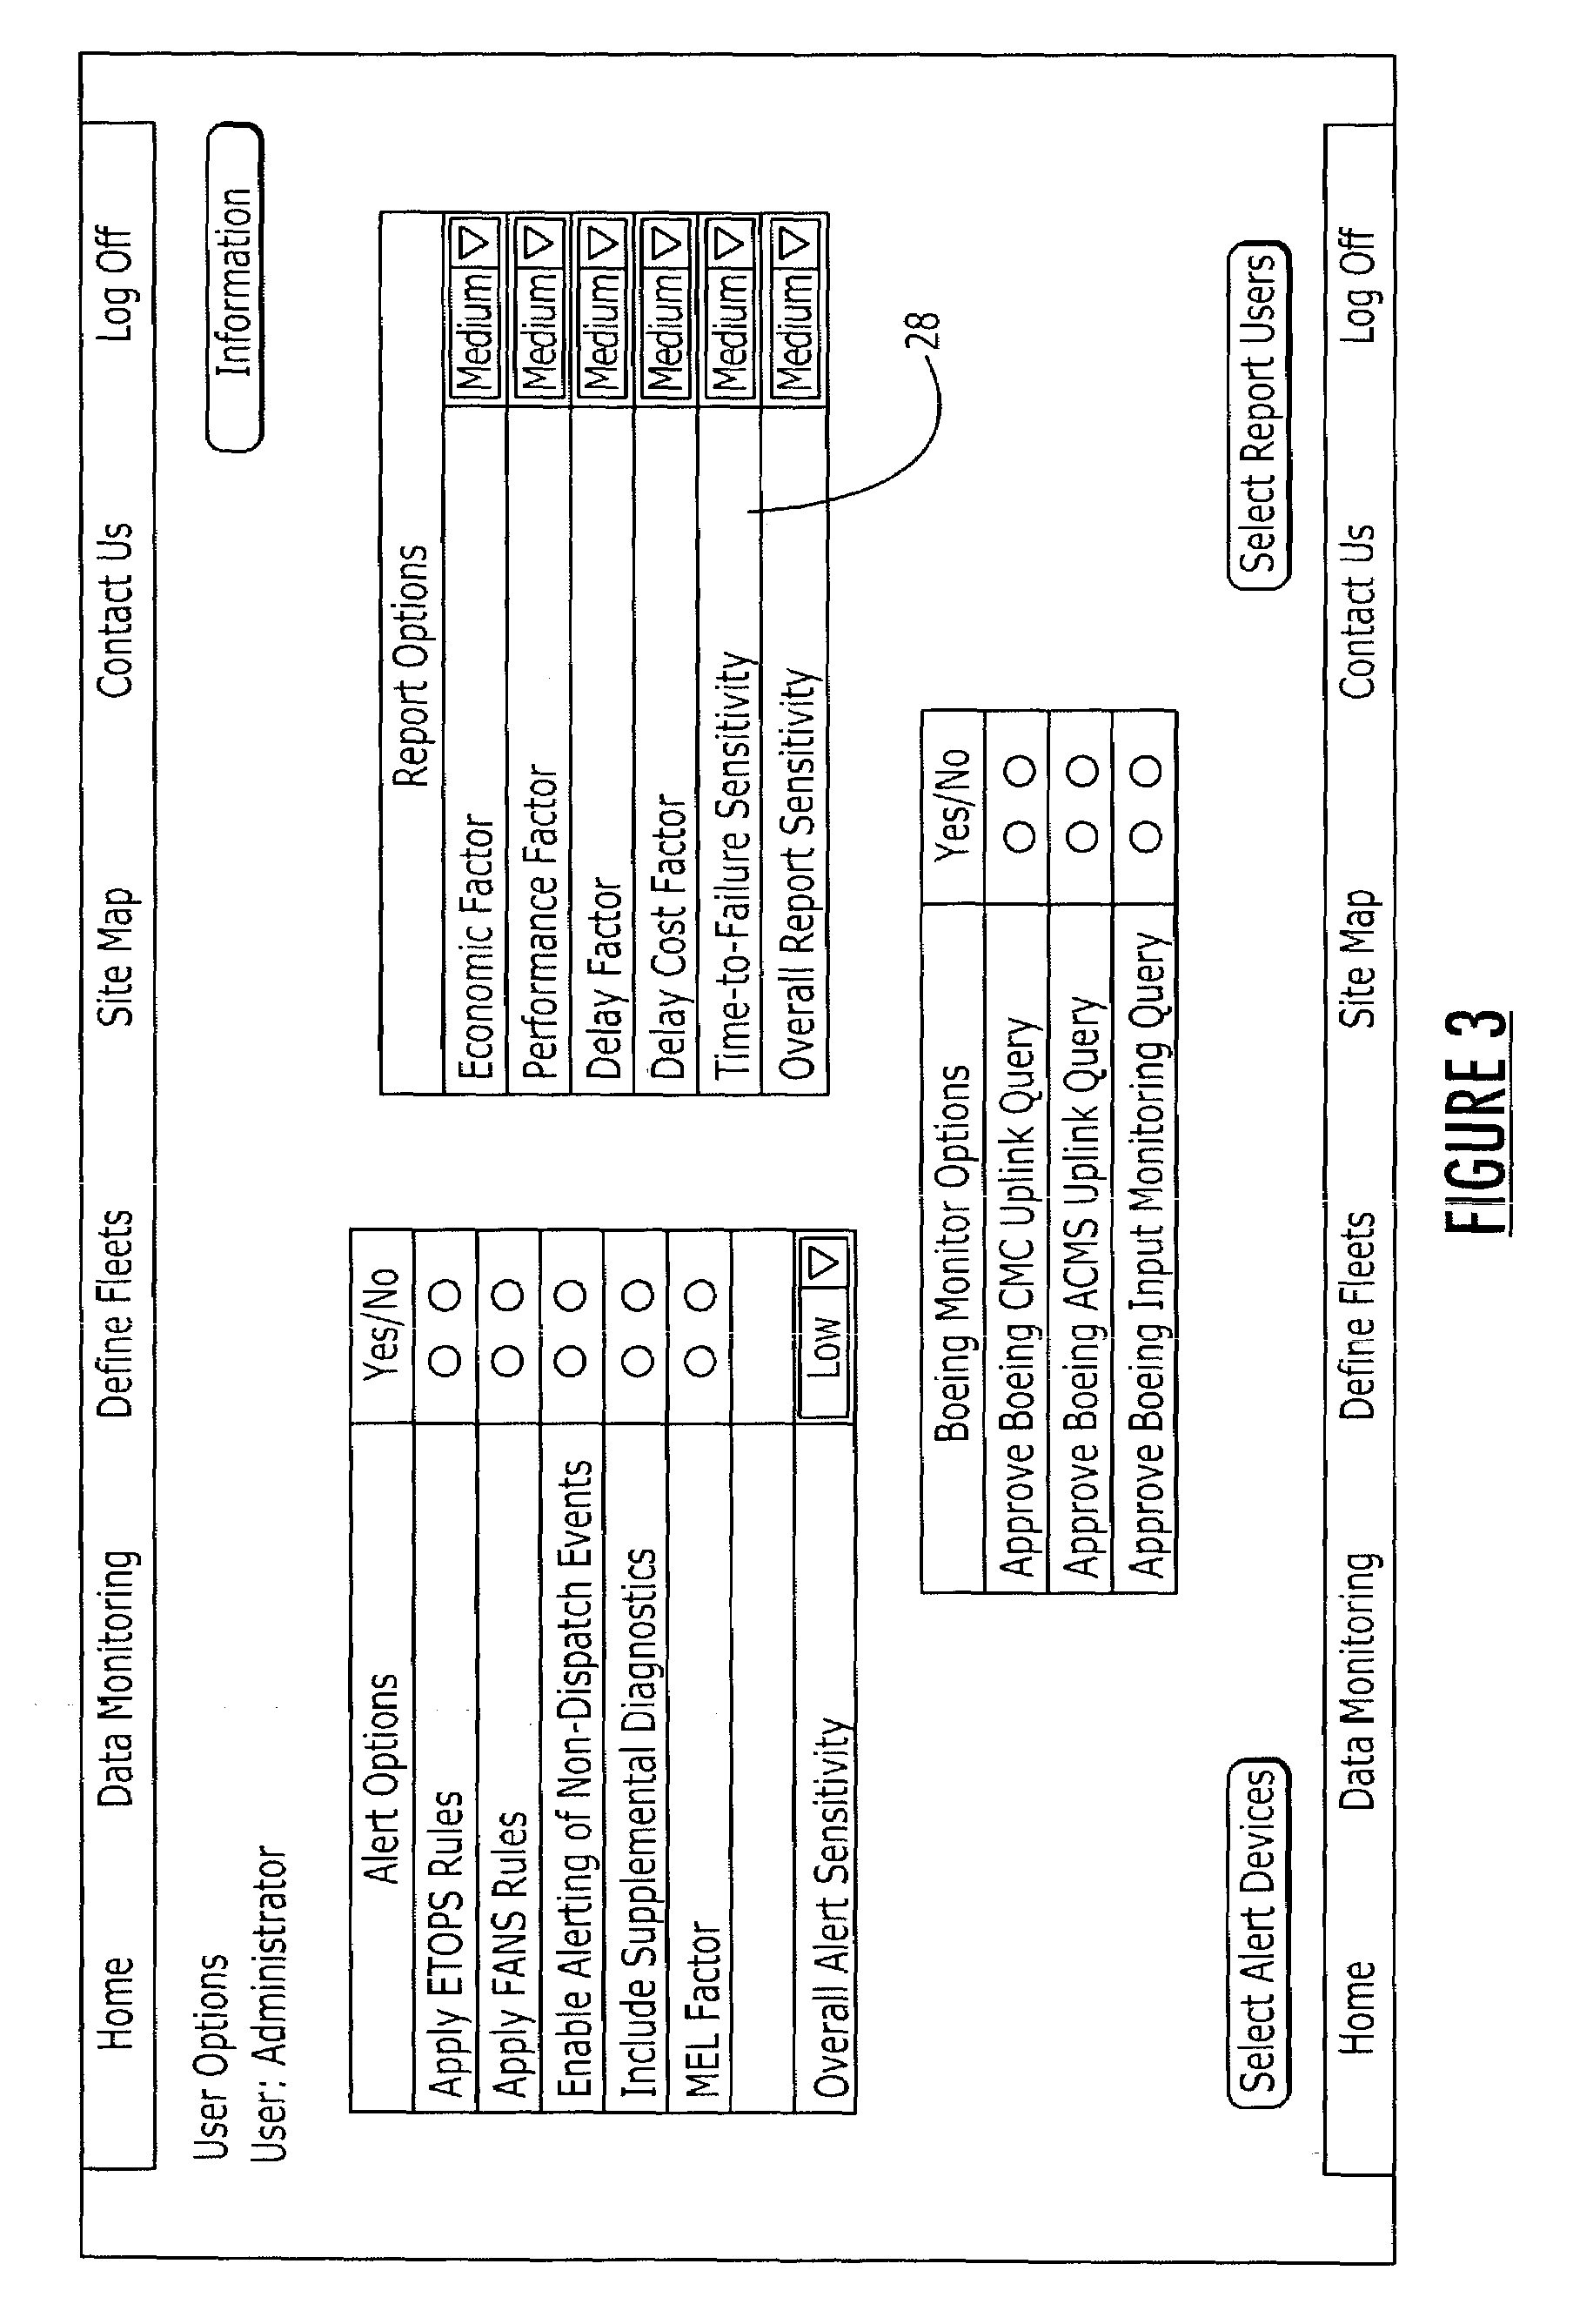 Vehicle monitoring and reporting system and method